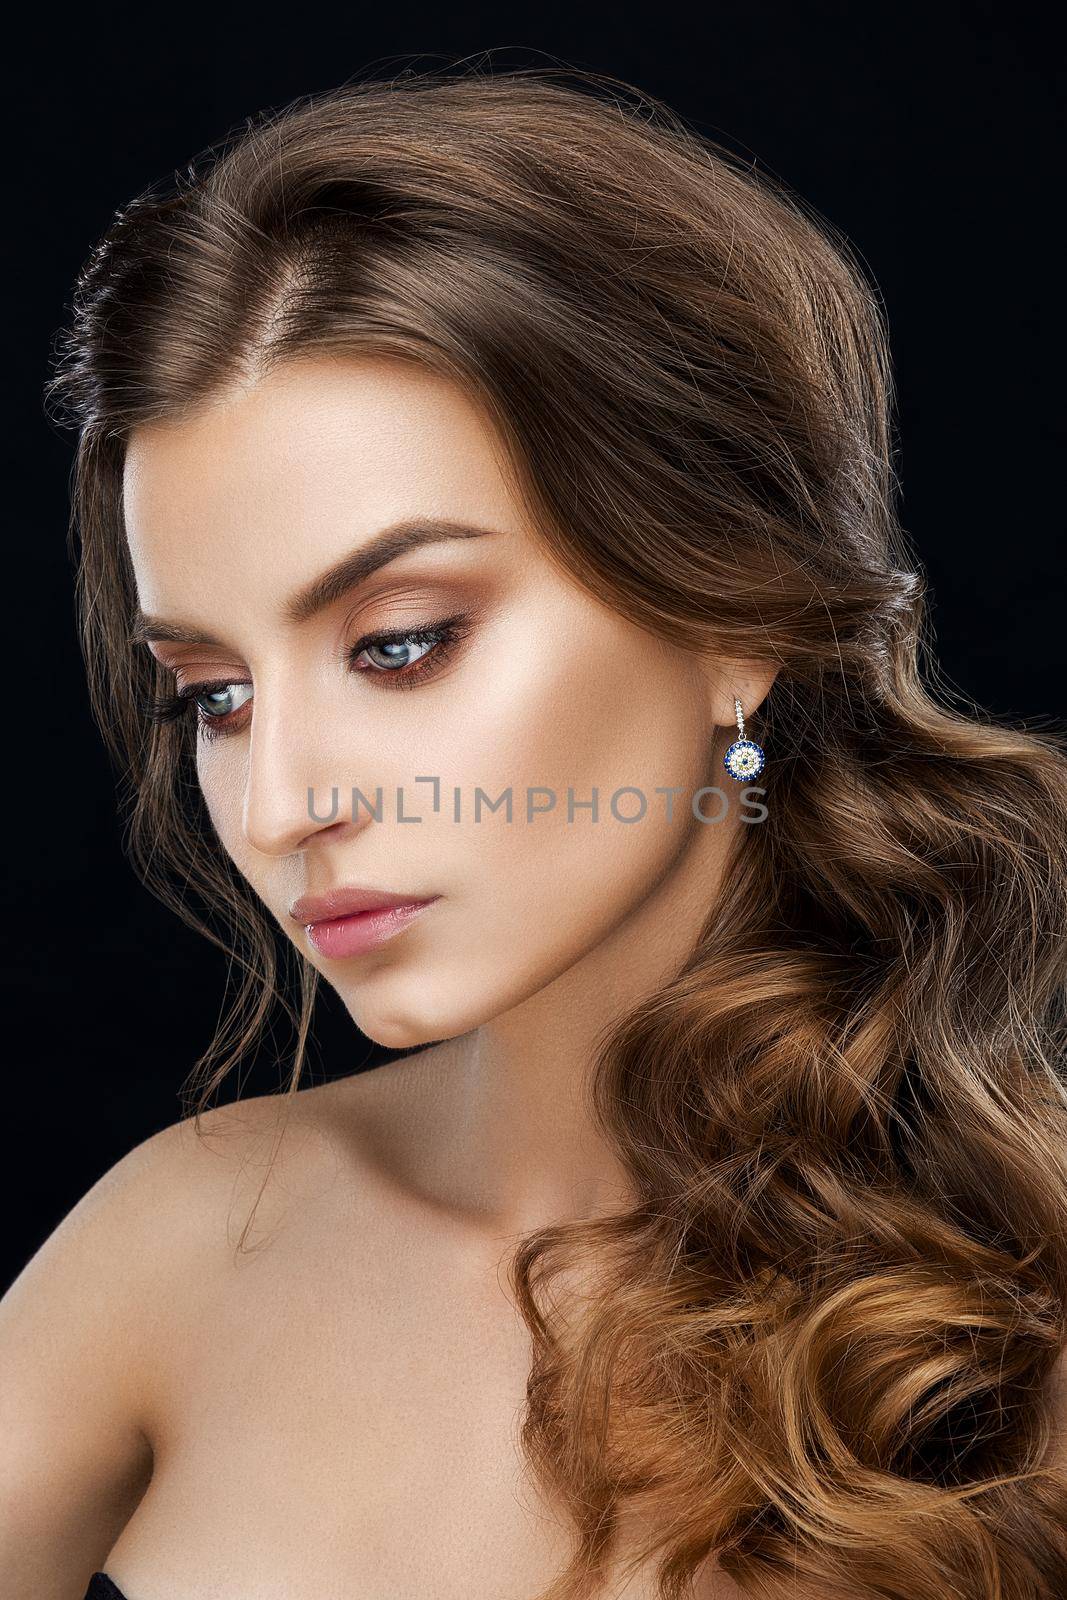 Studio fashion portrait of attractive sensual young woman with long wavy fair hair and blue eyes looking at camera. Natural beauty concept. Caucasian.